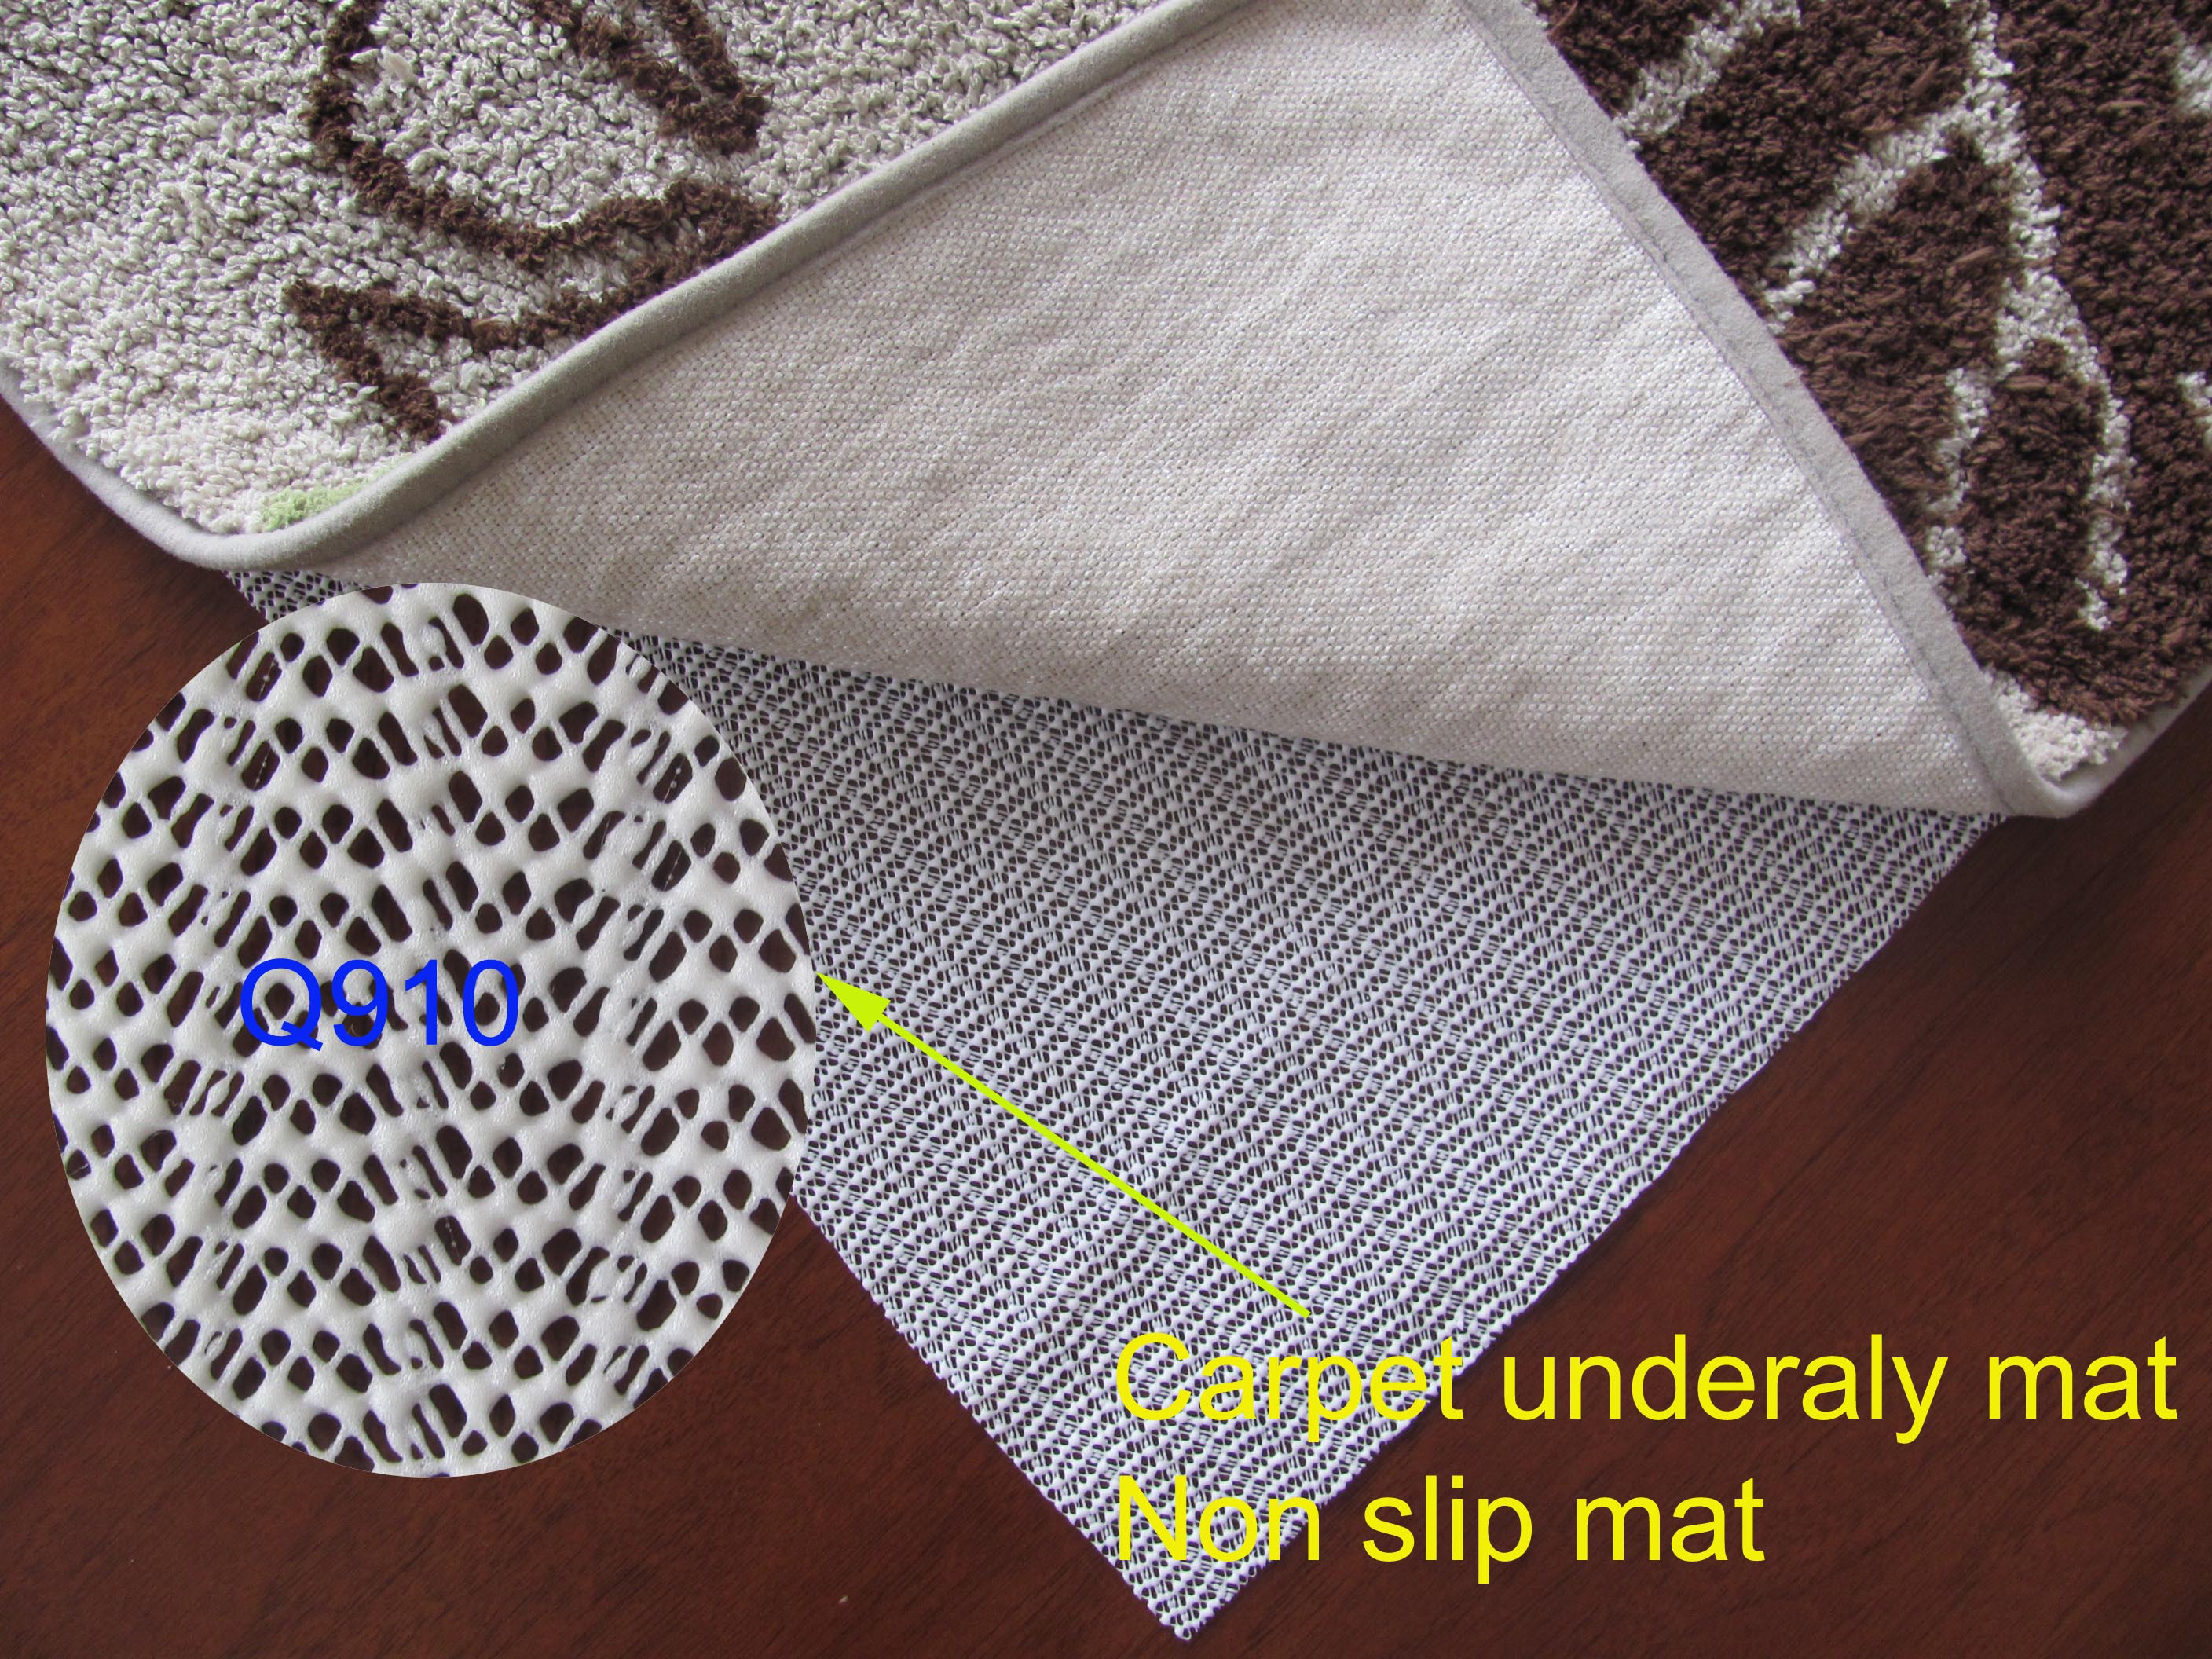 White Fine Hole Anti-skid Carpet Underlay, Household Water Absorbing And Wear-resistant PVC